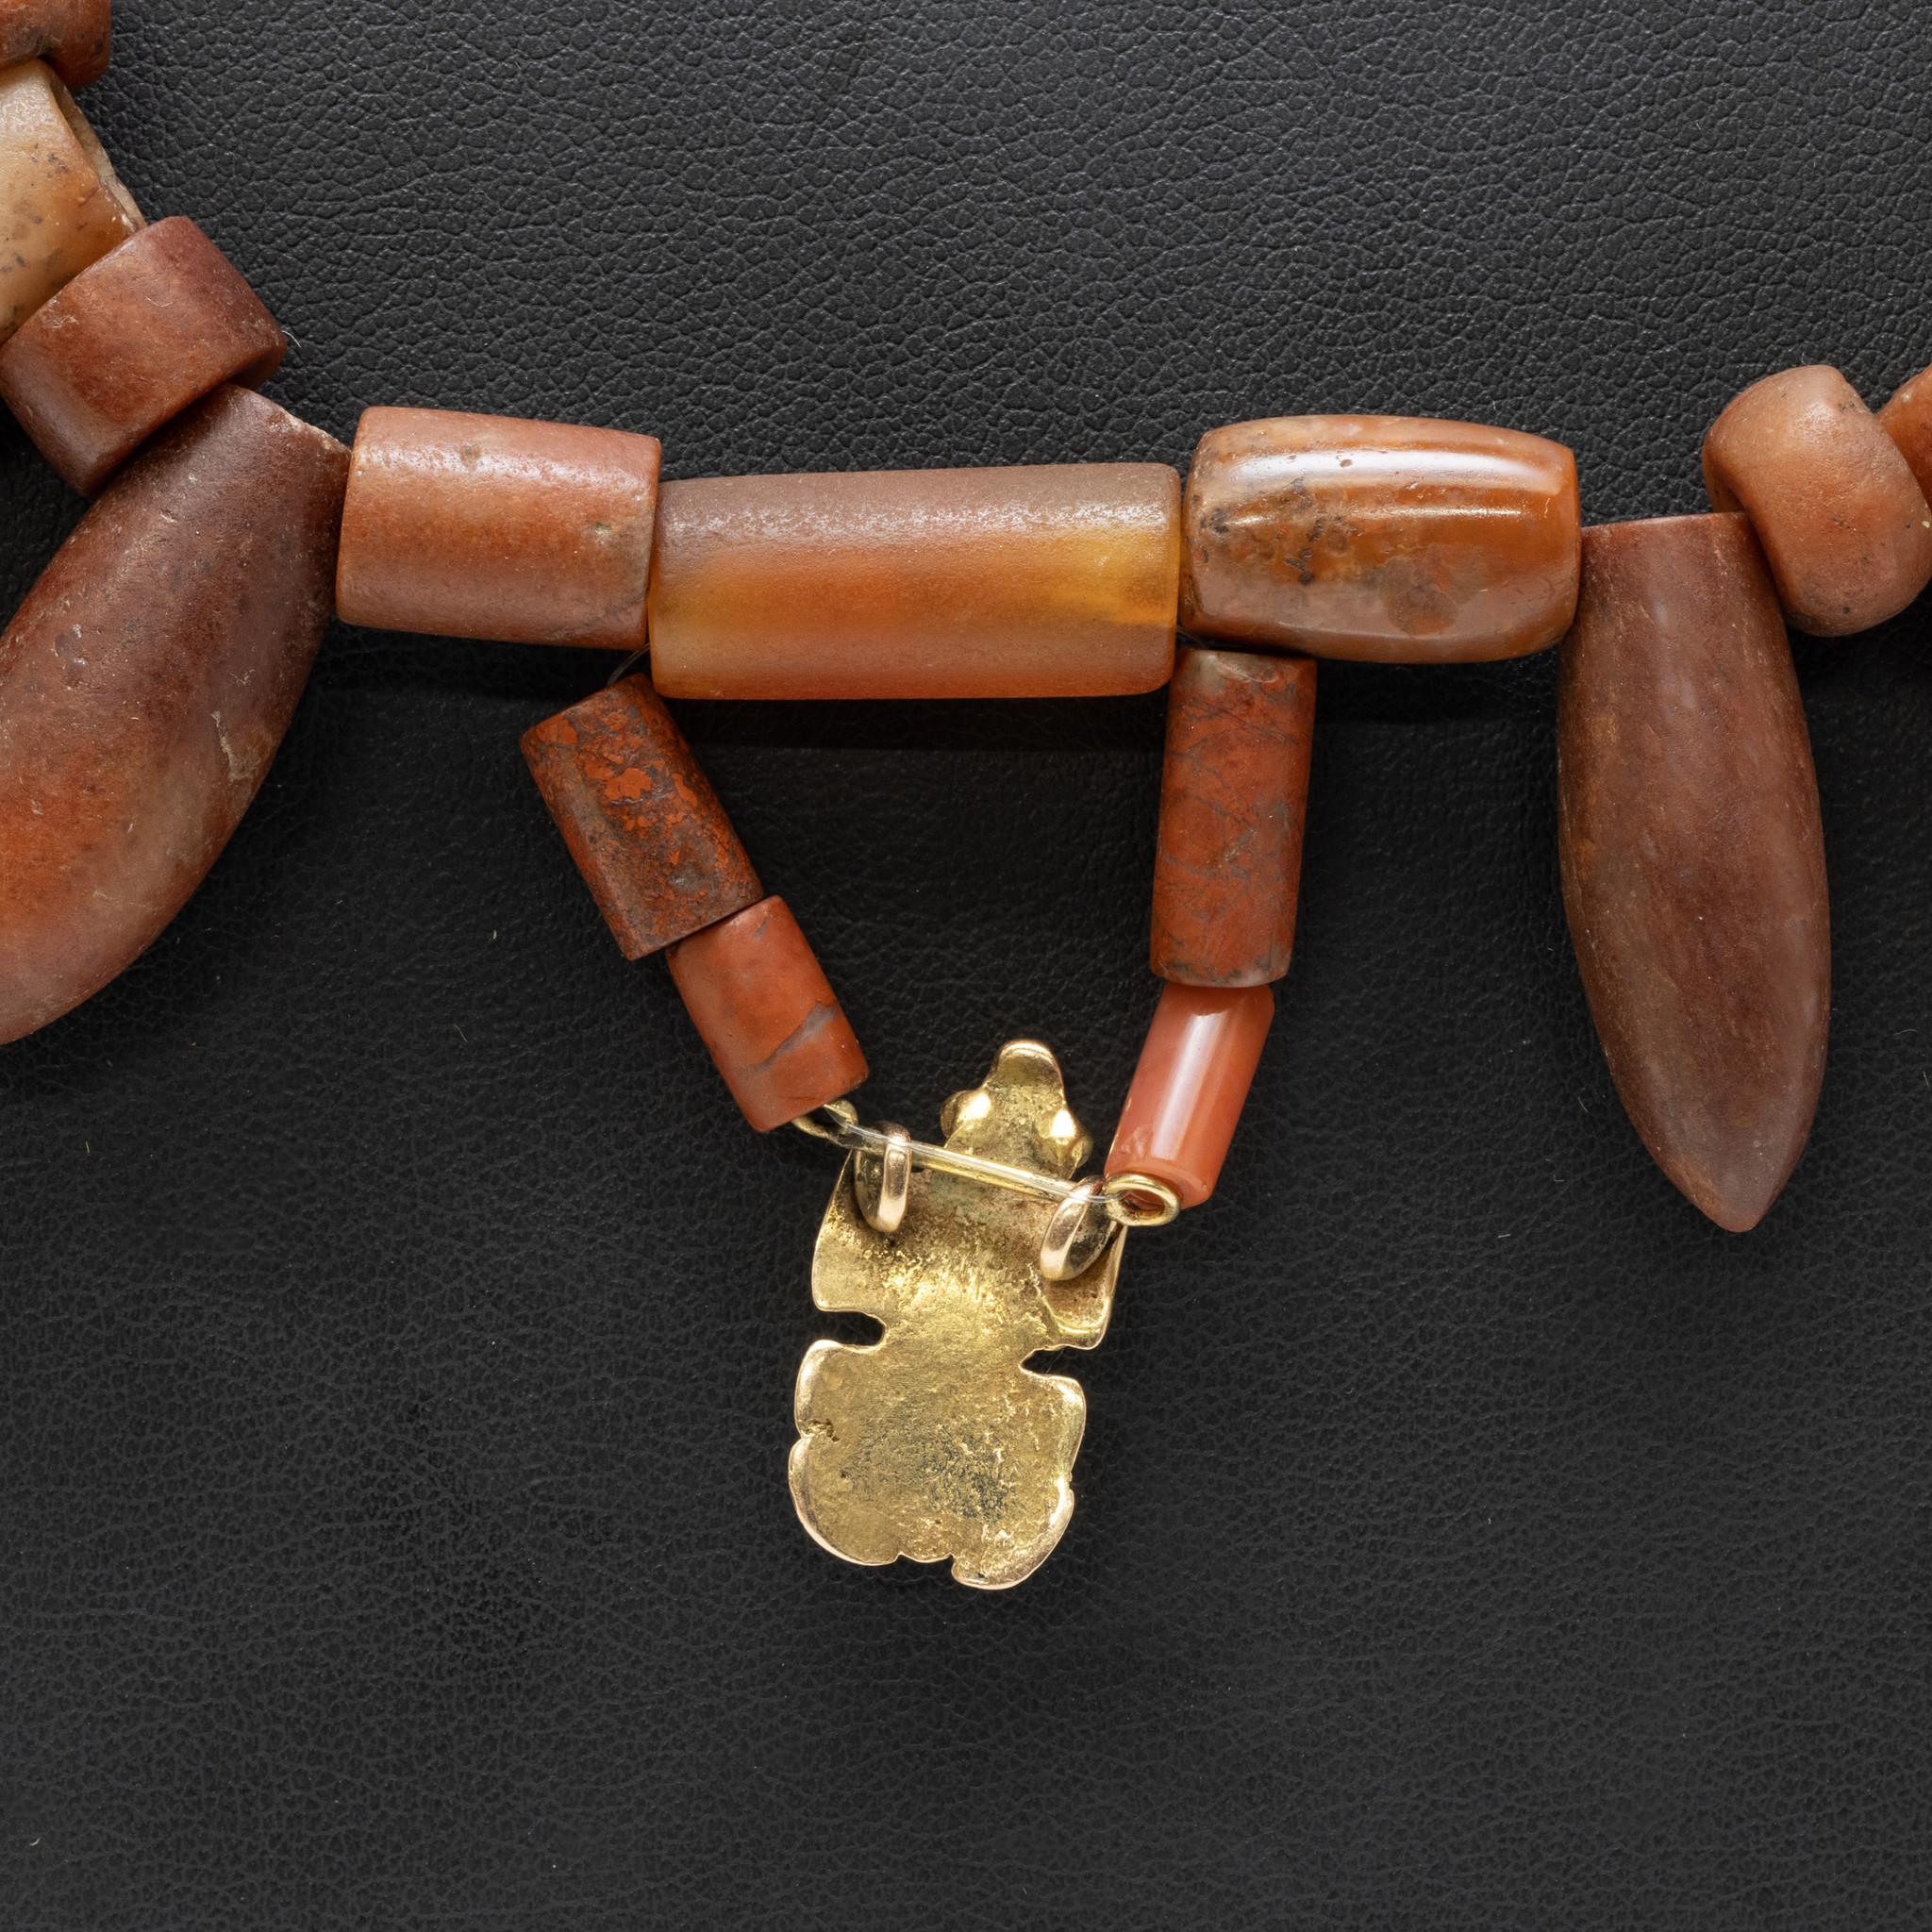 Pre-Columbian, Northern Colombia, Tairona culture, circa 800 to 1500 CE. A wonderful necklace of wearable form constructed with dozens of hand-carved carnelian beads. Dozens of additional greenstone beads line the upper portion of the necklace while